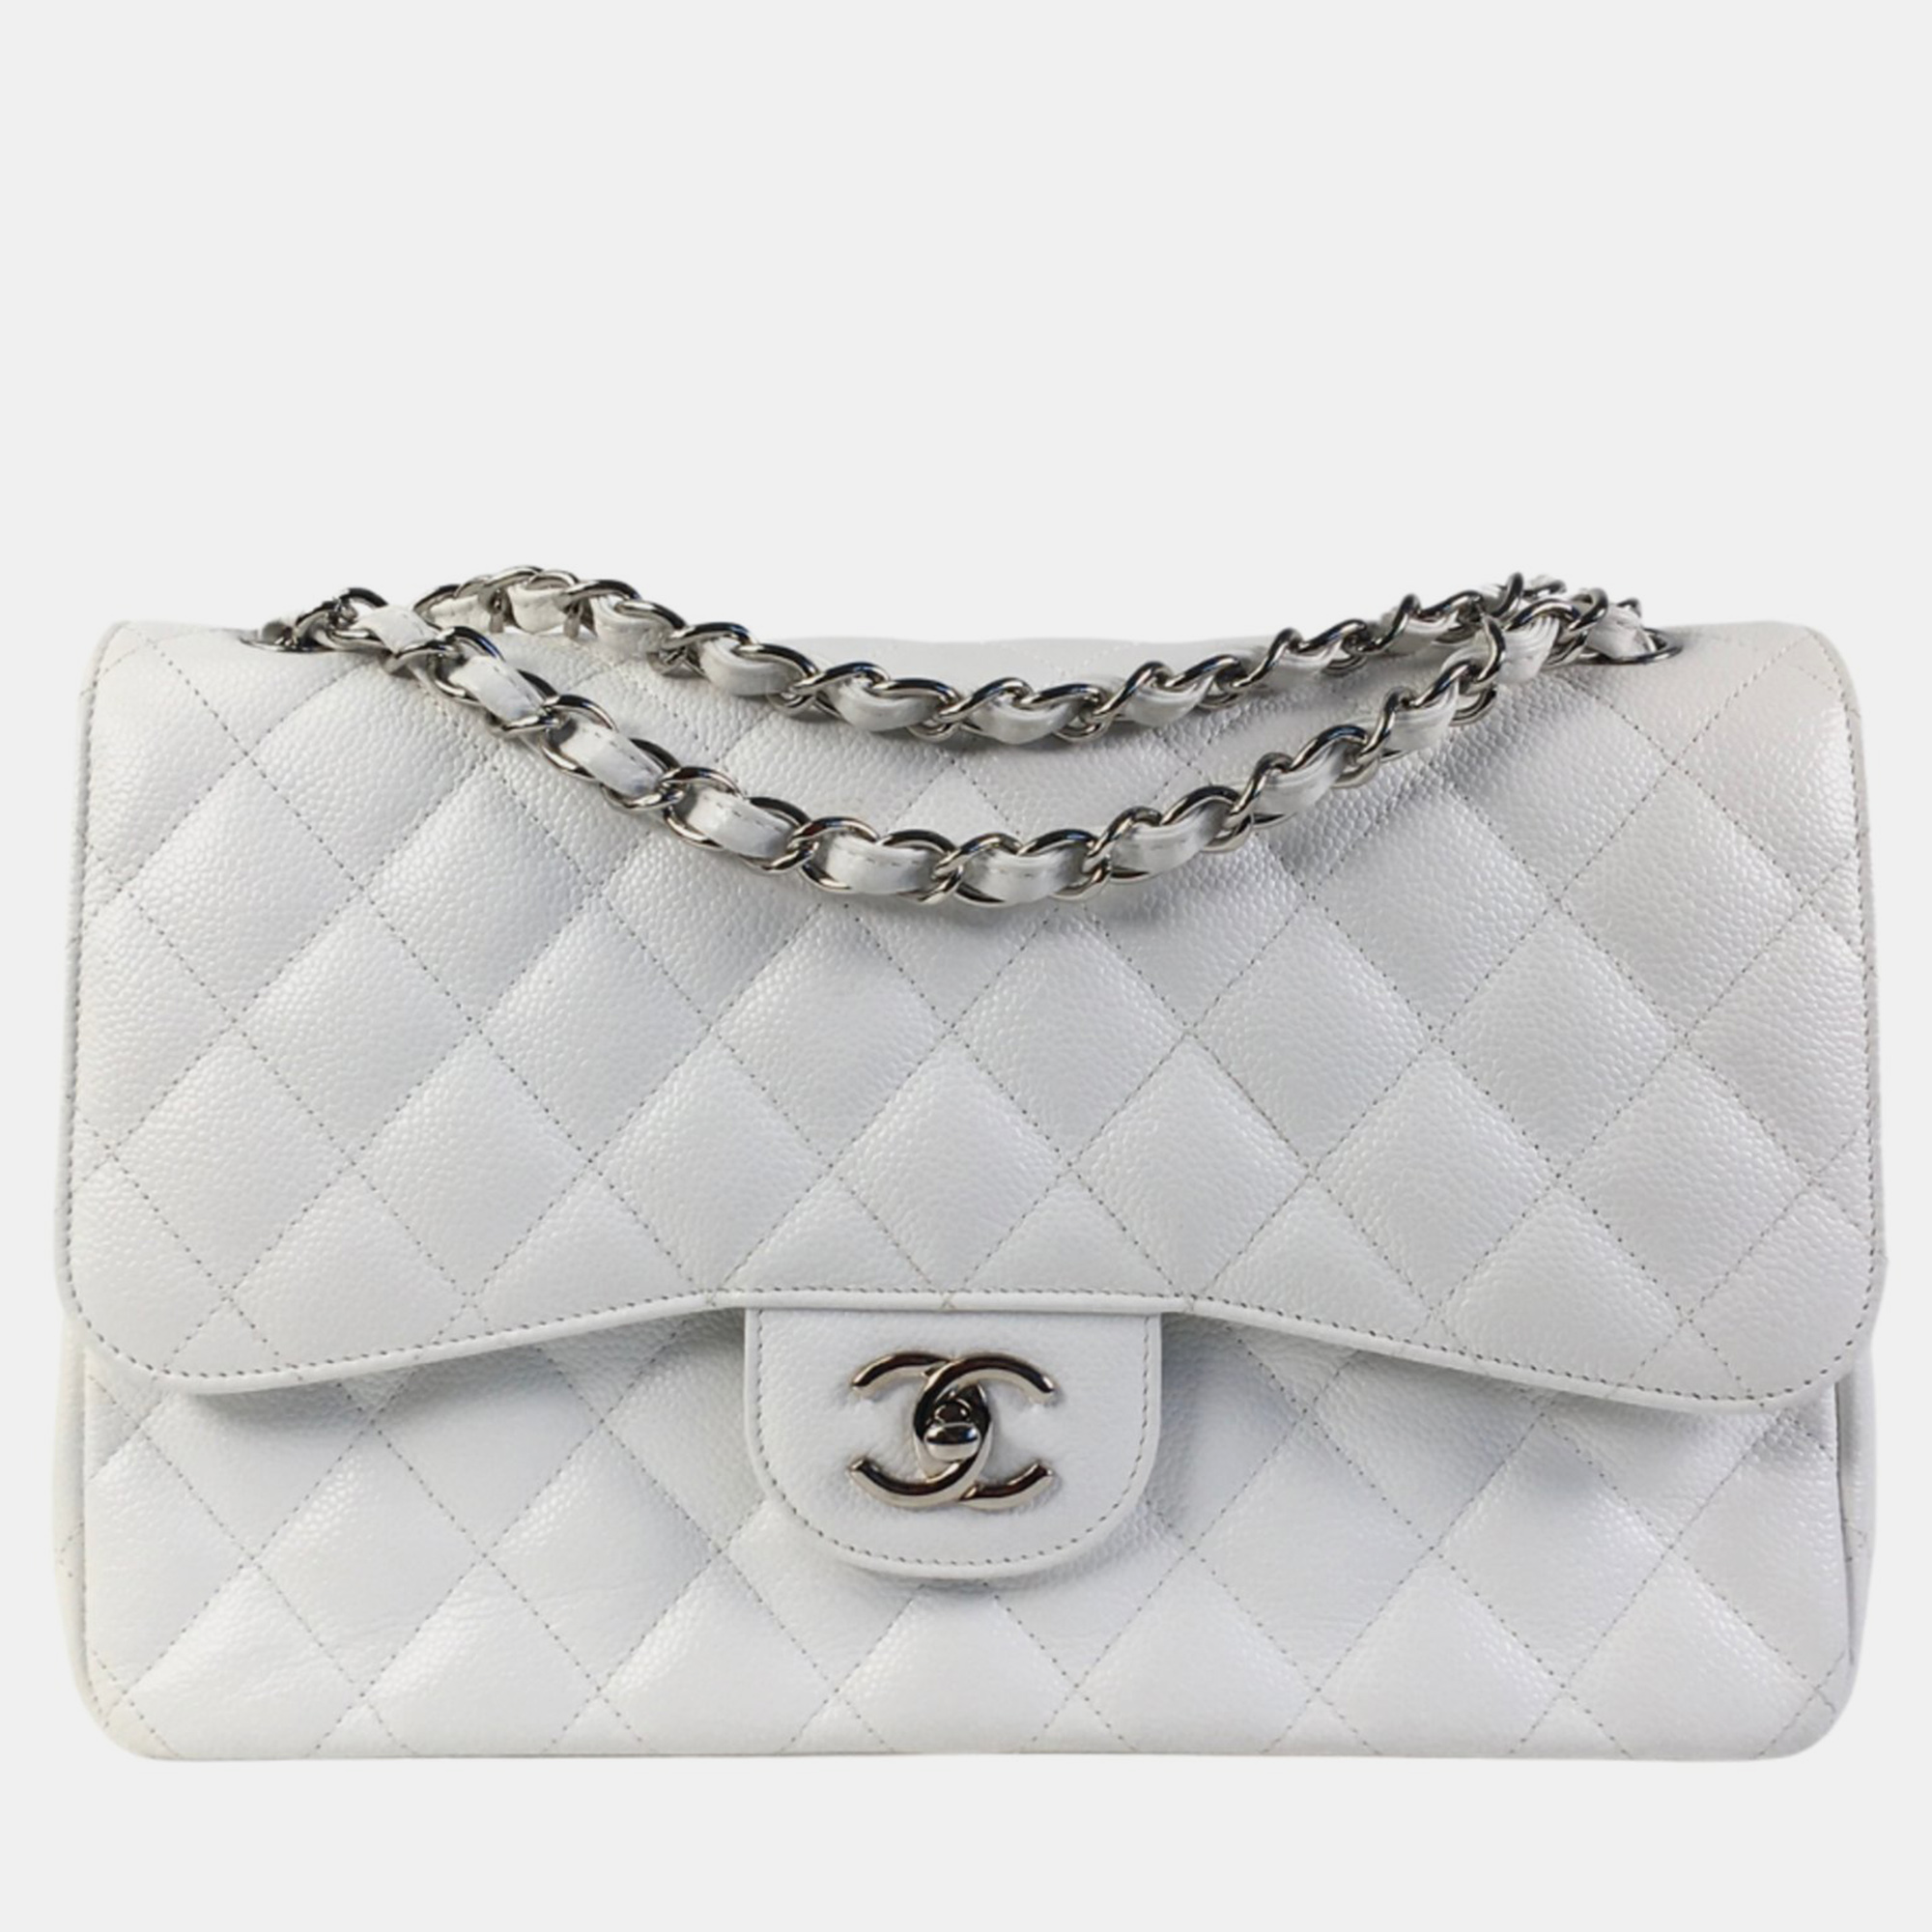 Chanel white caviar leather jumbo classic double flap shoulder bag